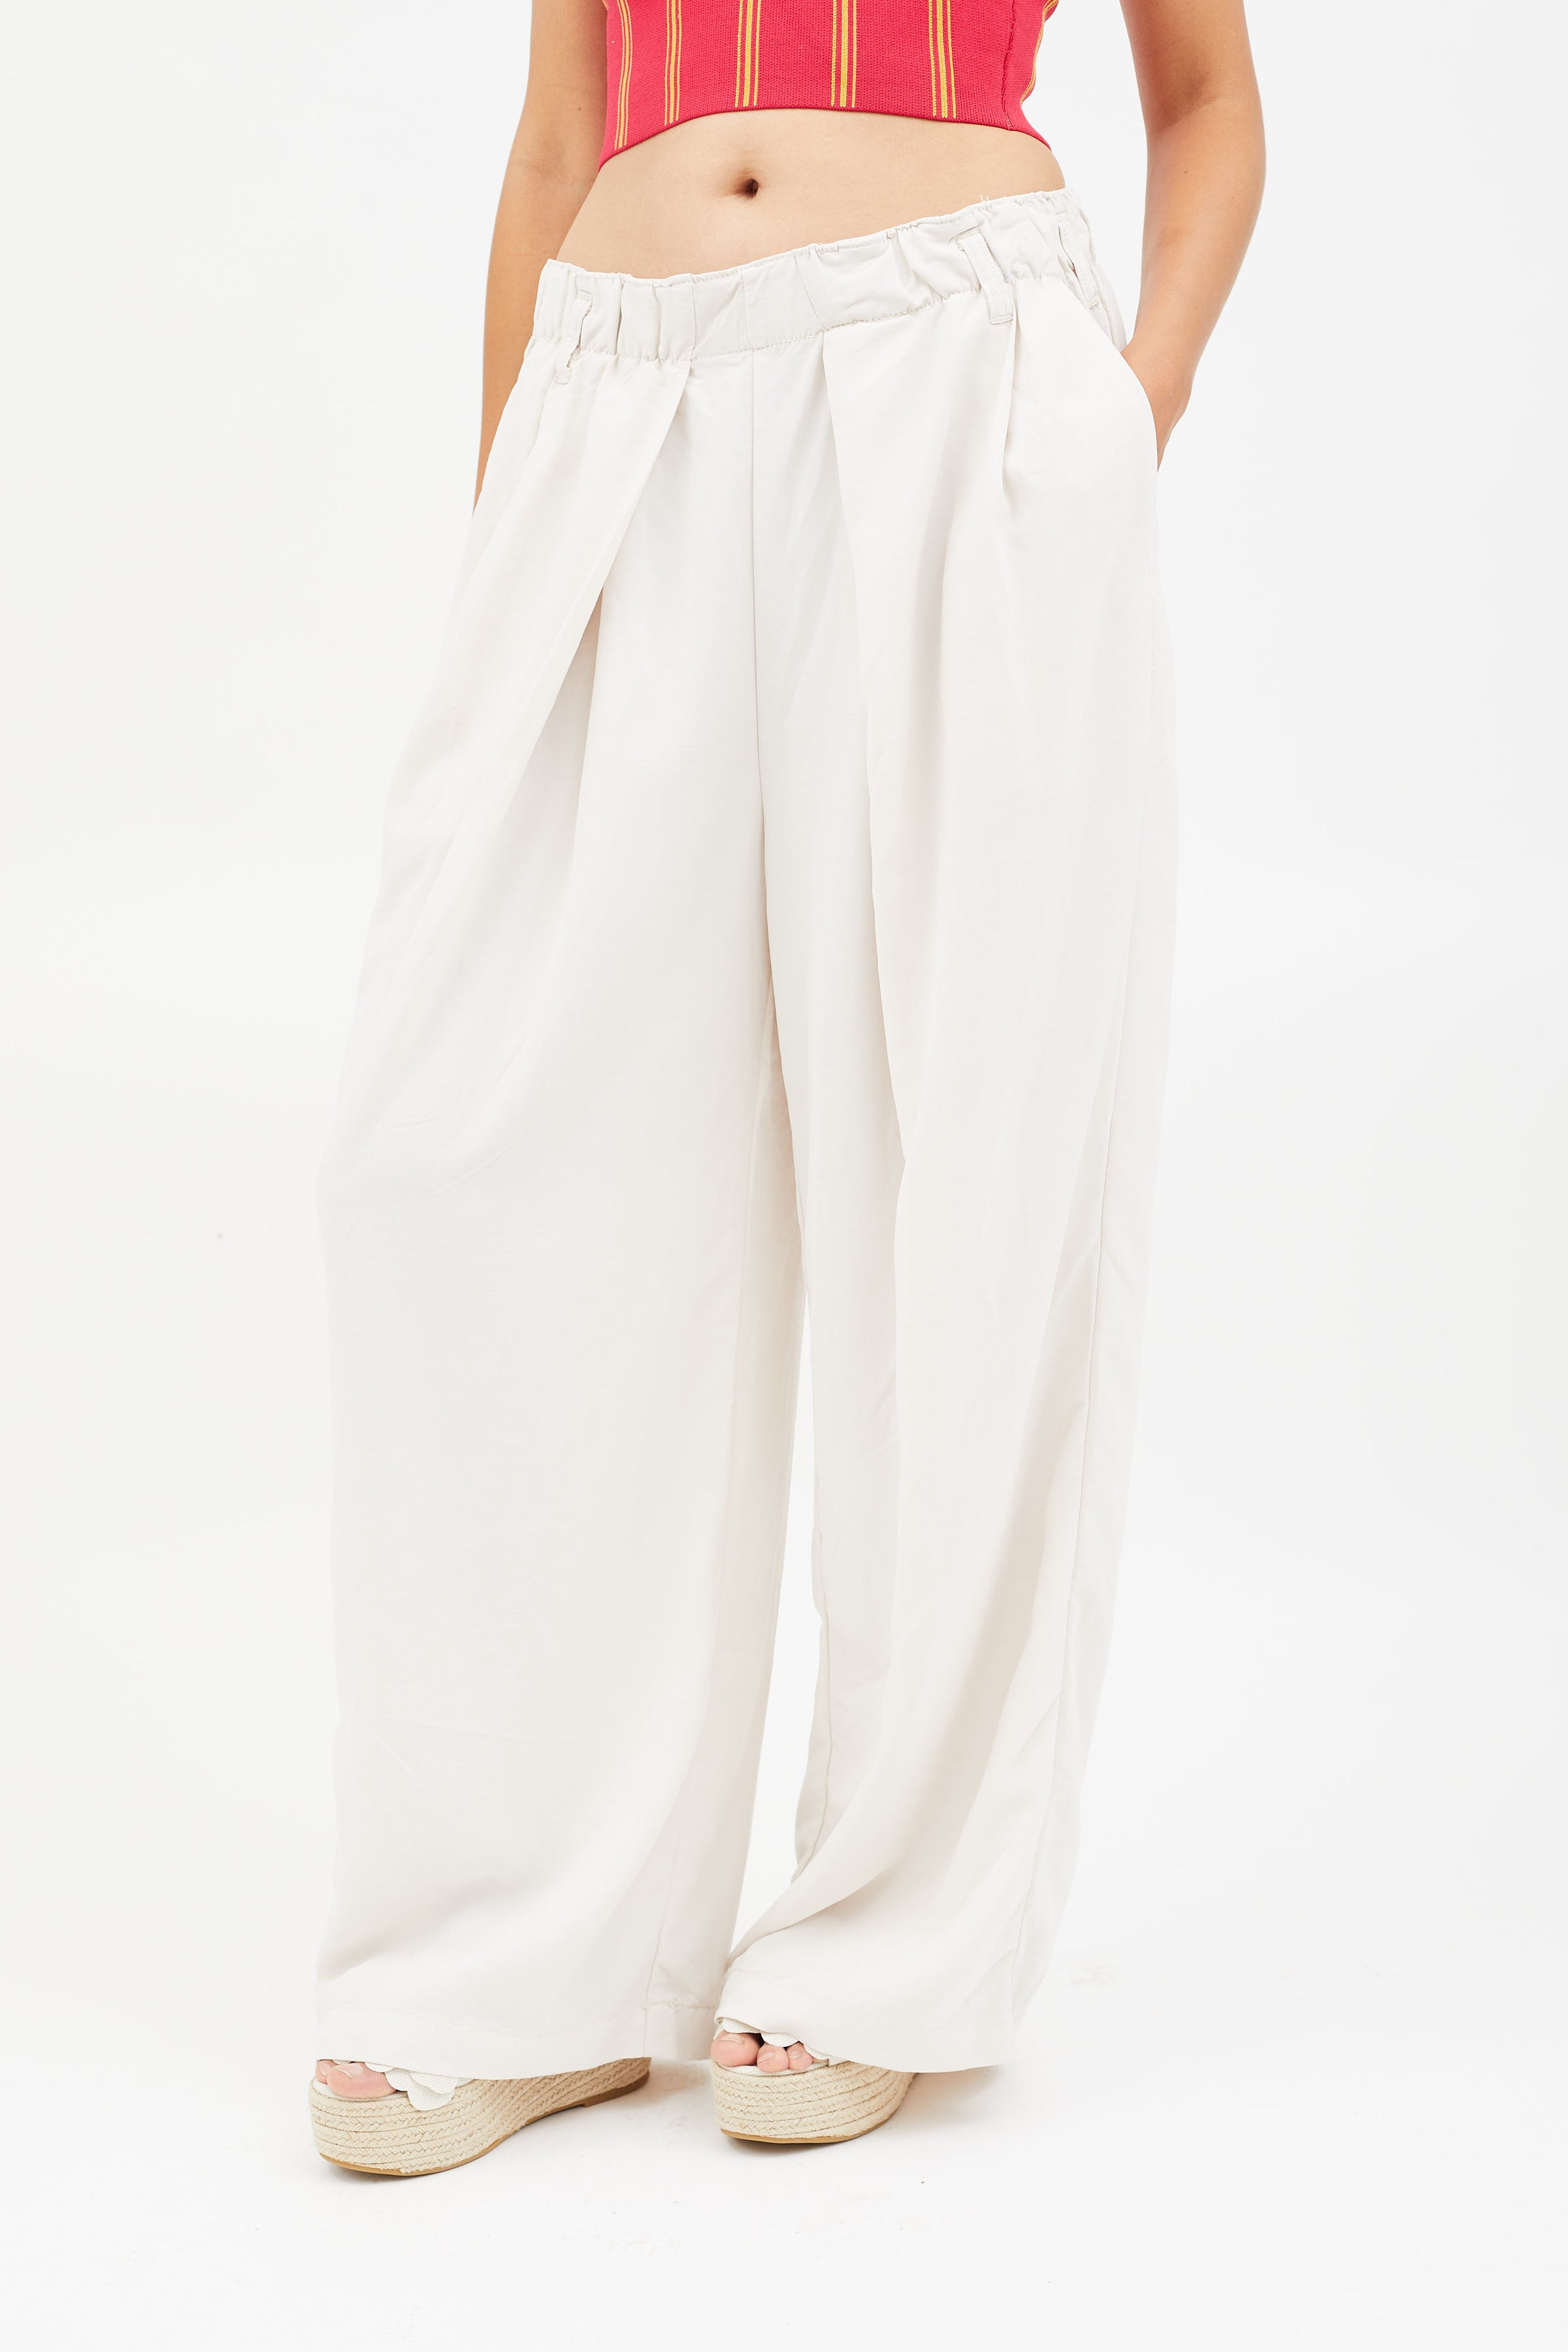 Free People // Cream Pleated Wide Leg Pant – VSP Consignment